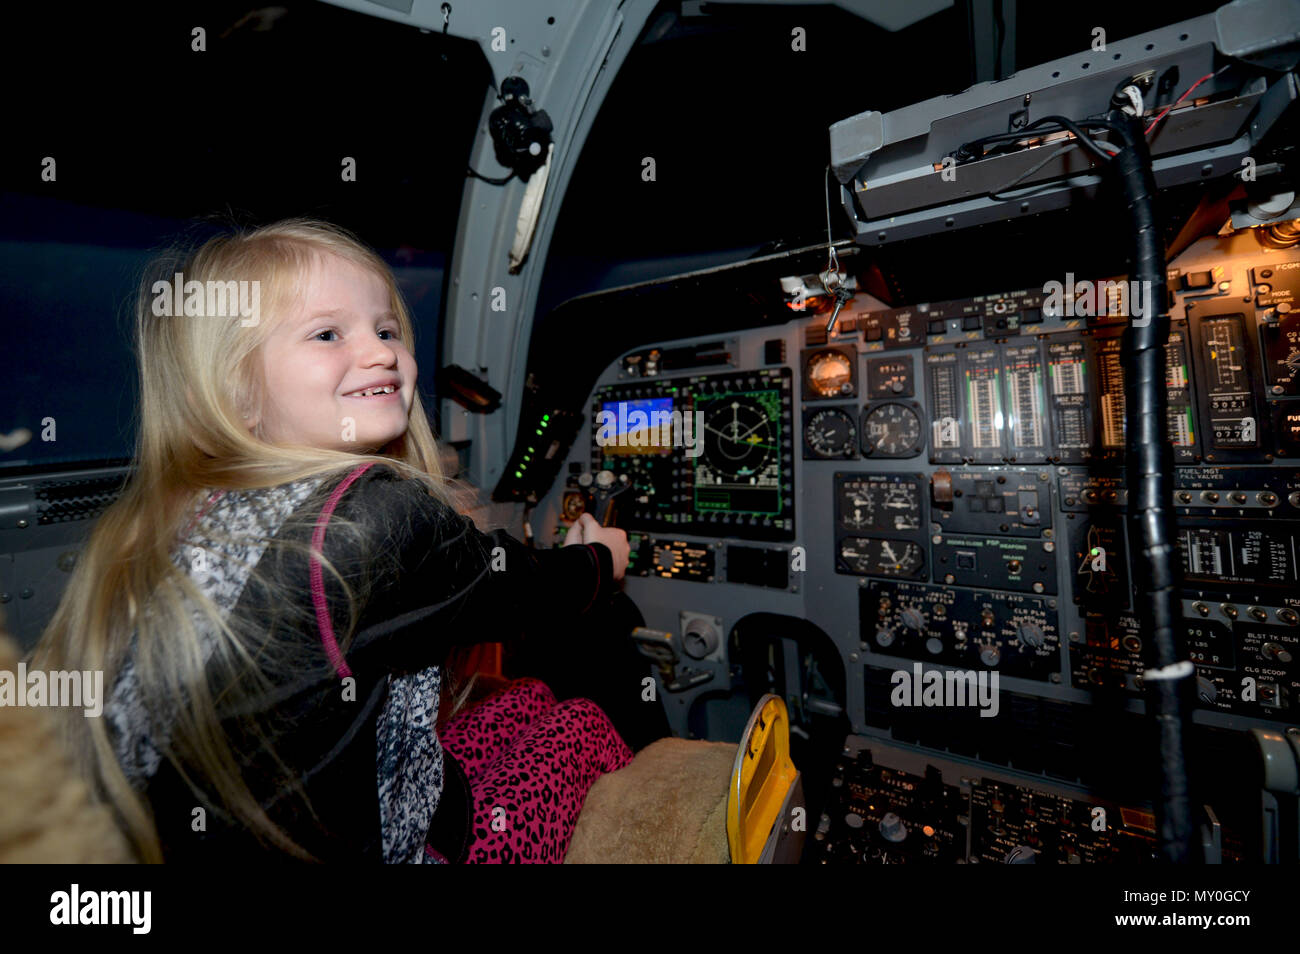 Zaida Knight, daughter of retired Tech. Sgt. Michael Knight and his wife, Traci Knight, flies a B-1 bomber simulator at Ellsworth Air Force Base, S.D., Dec. 20, 2016. The simulator consists of two sections, one for flying the plane itself and one for bombing. Stock Photo